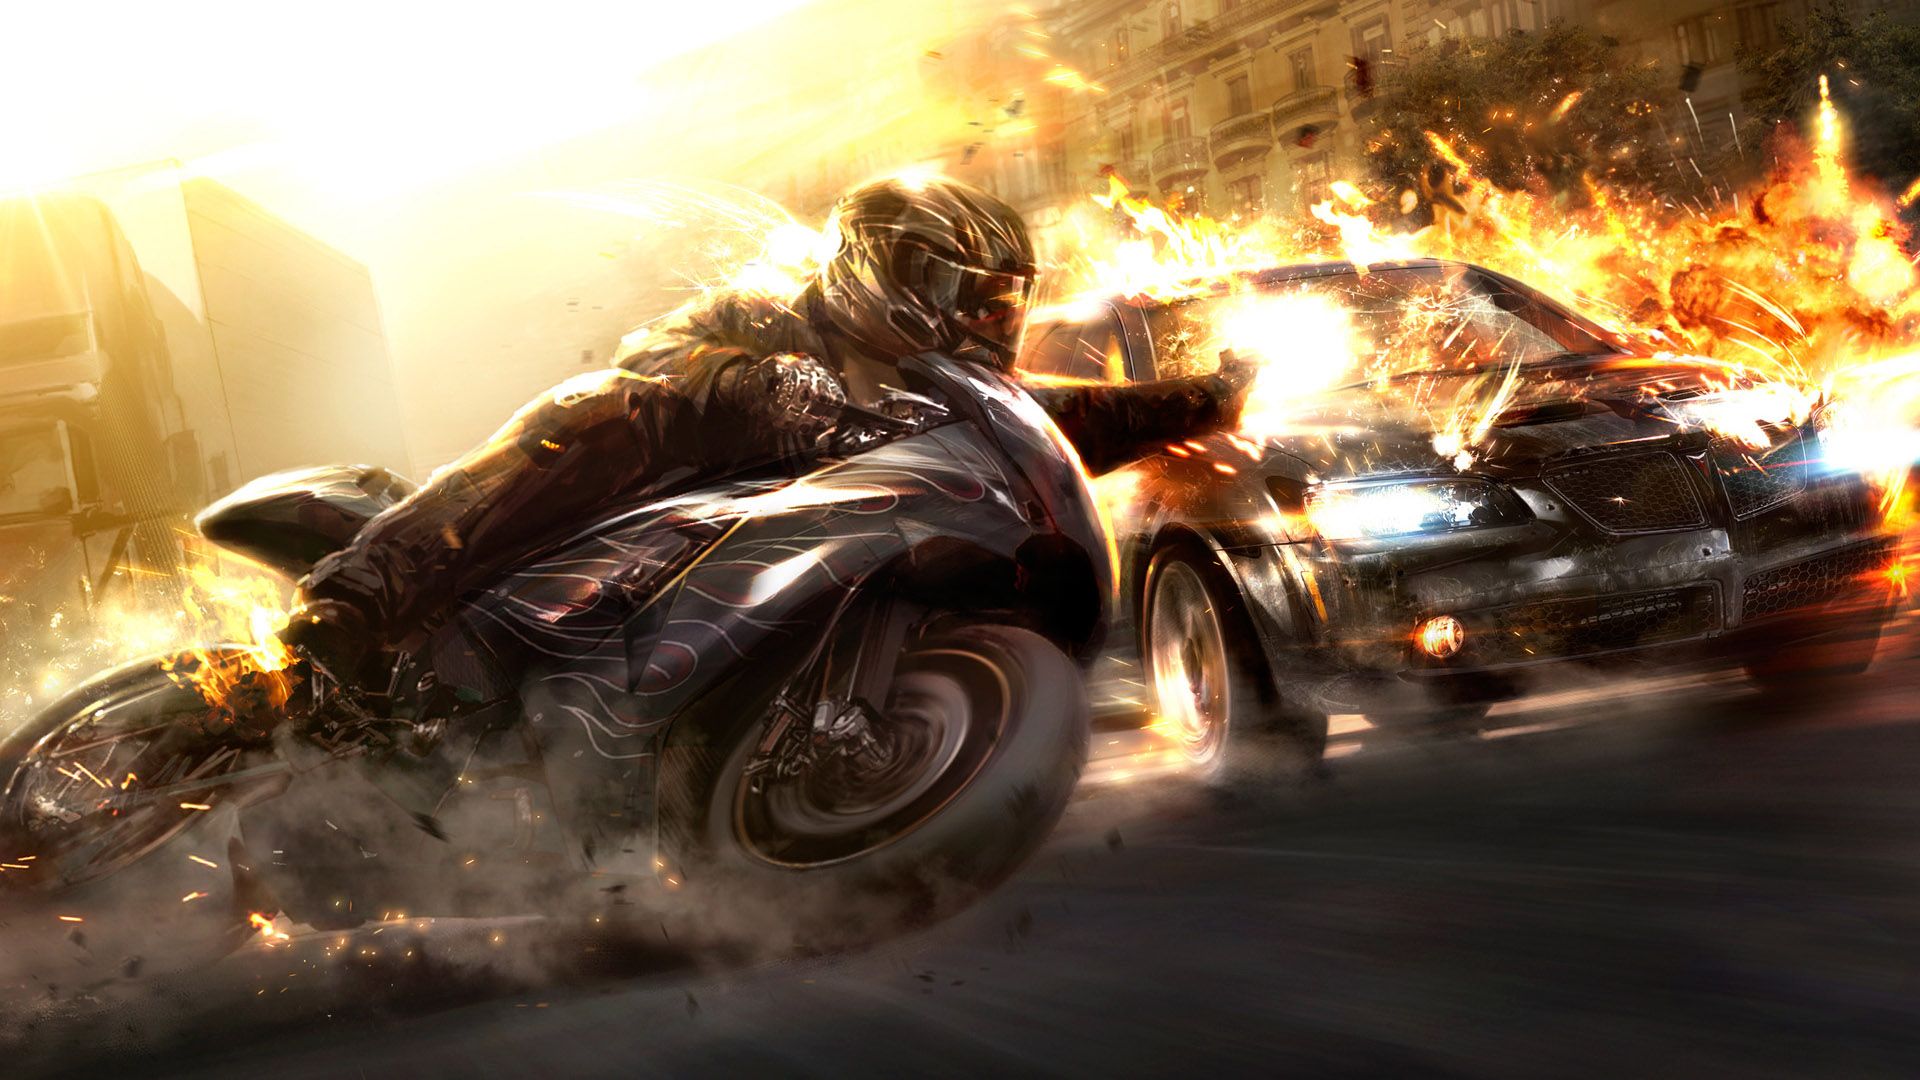 1920x1080 Bike Image And Wallpaper Download